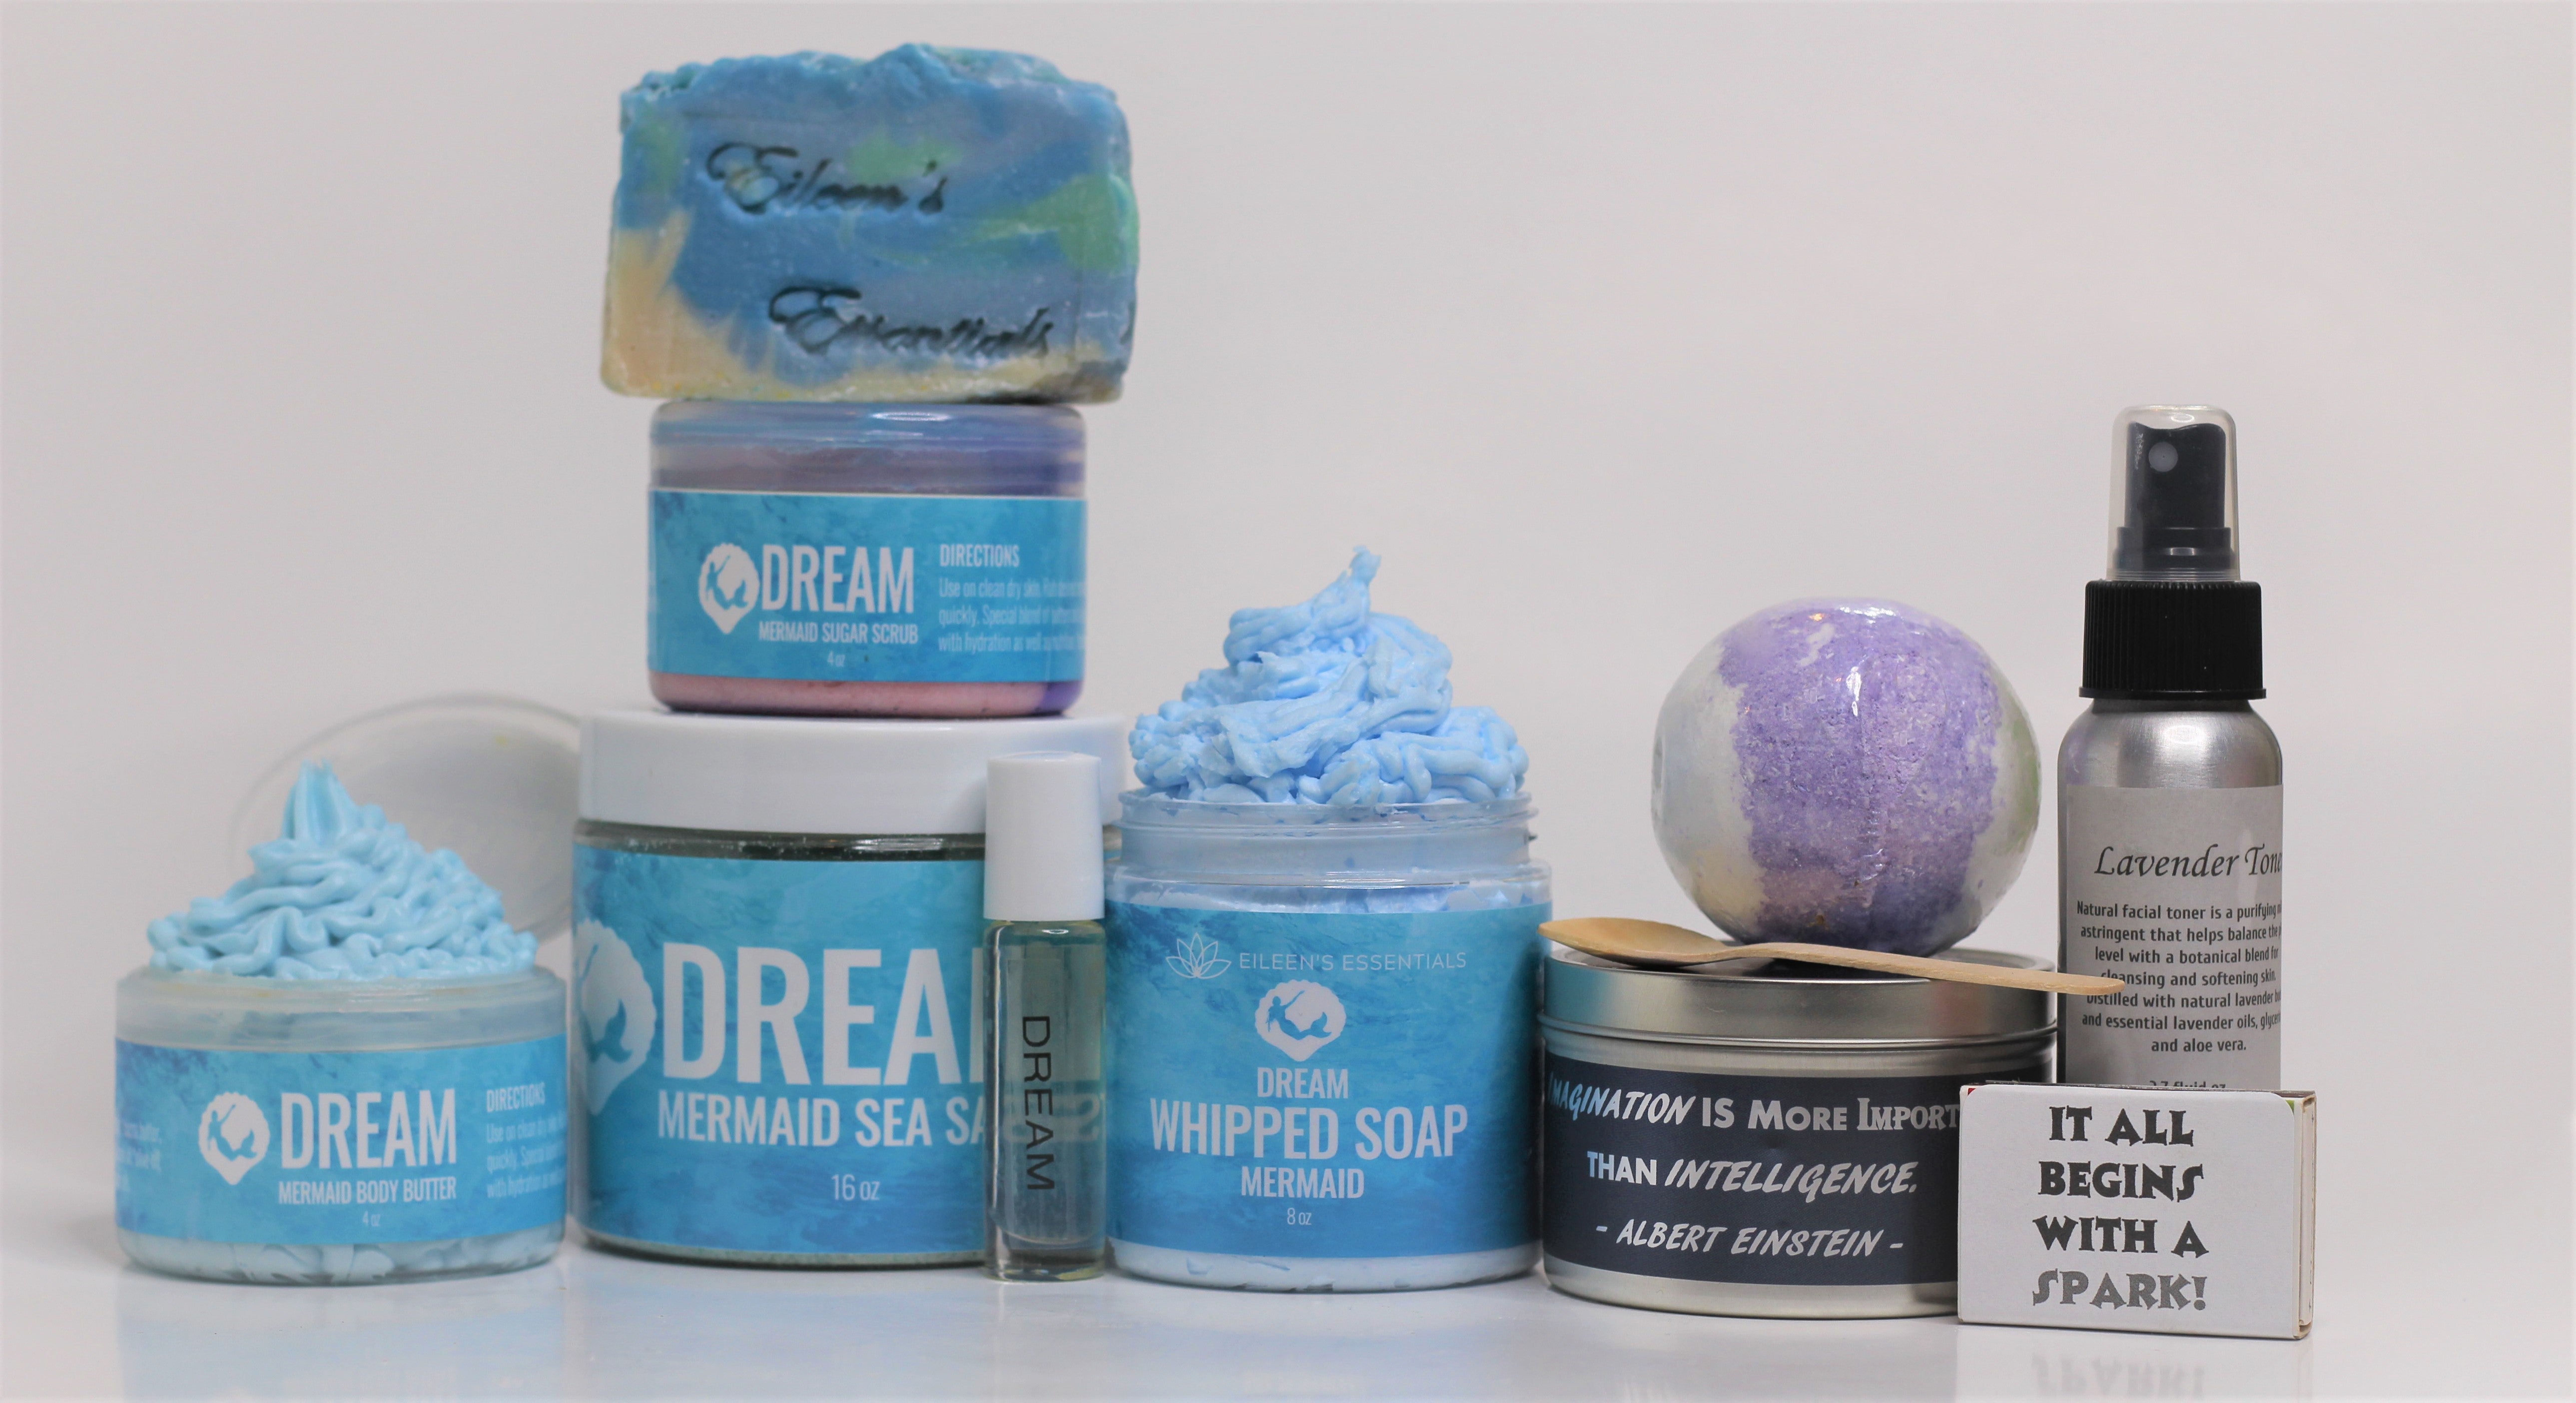 The Ultimate Spa Gift Set; "DREAM" (Citrus & Tropical Floral)